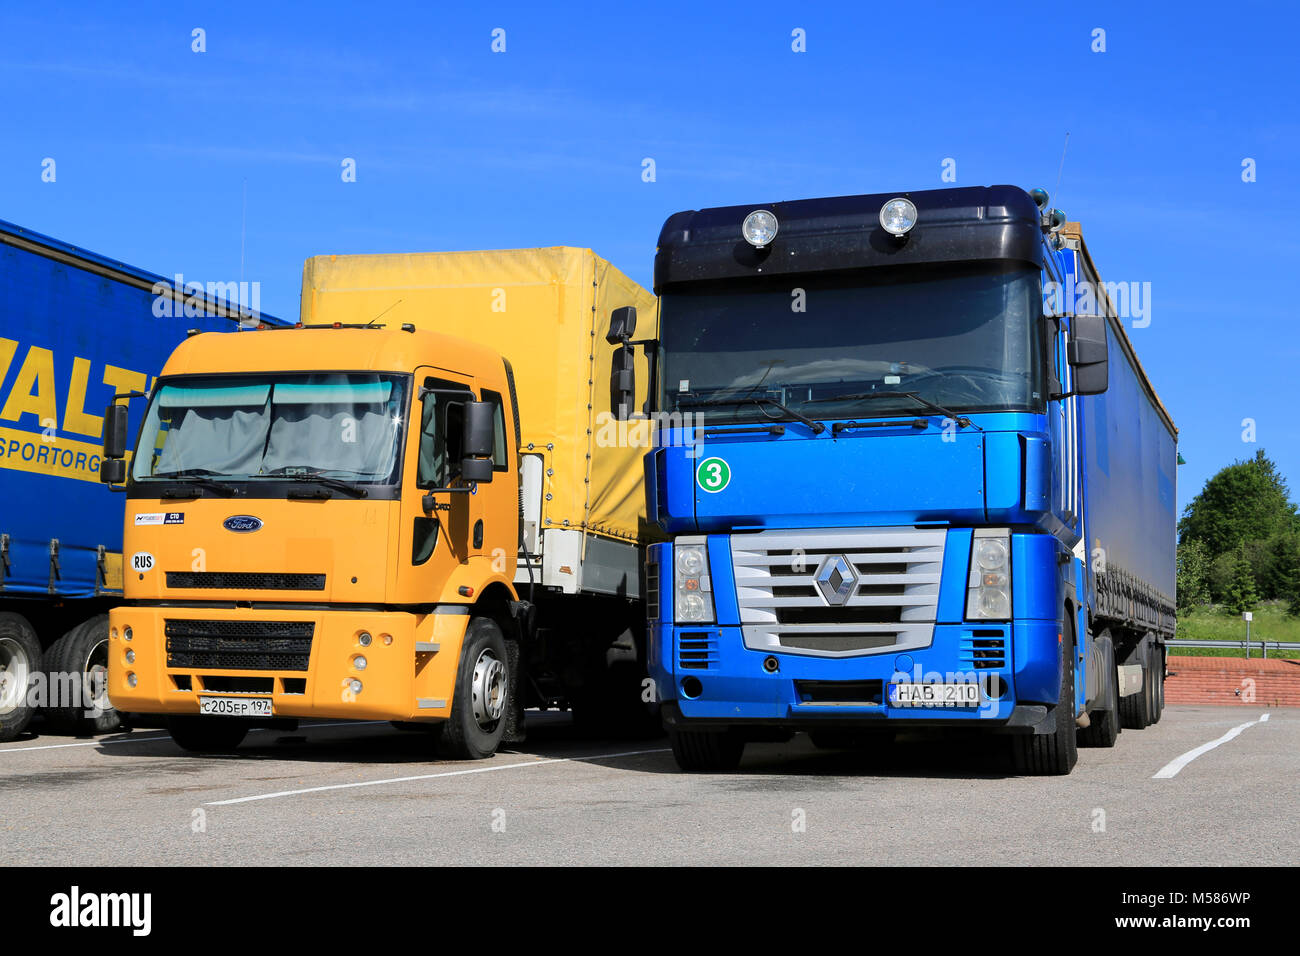 SALO, FINLAND - JUNE 15, 2014: Yellow Ford Cargo 1830 and blue Renault Magnum semi trucks parked. Ford Cargo was launched in 1981, and Renault Magnum  Stock Photo